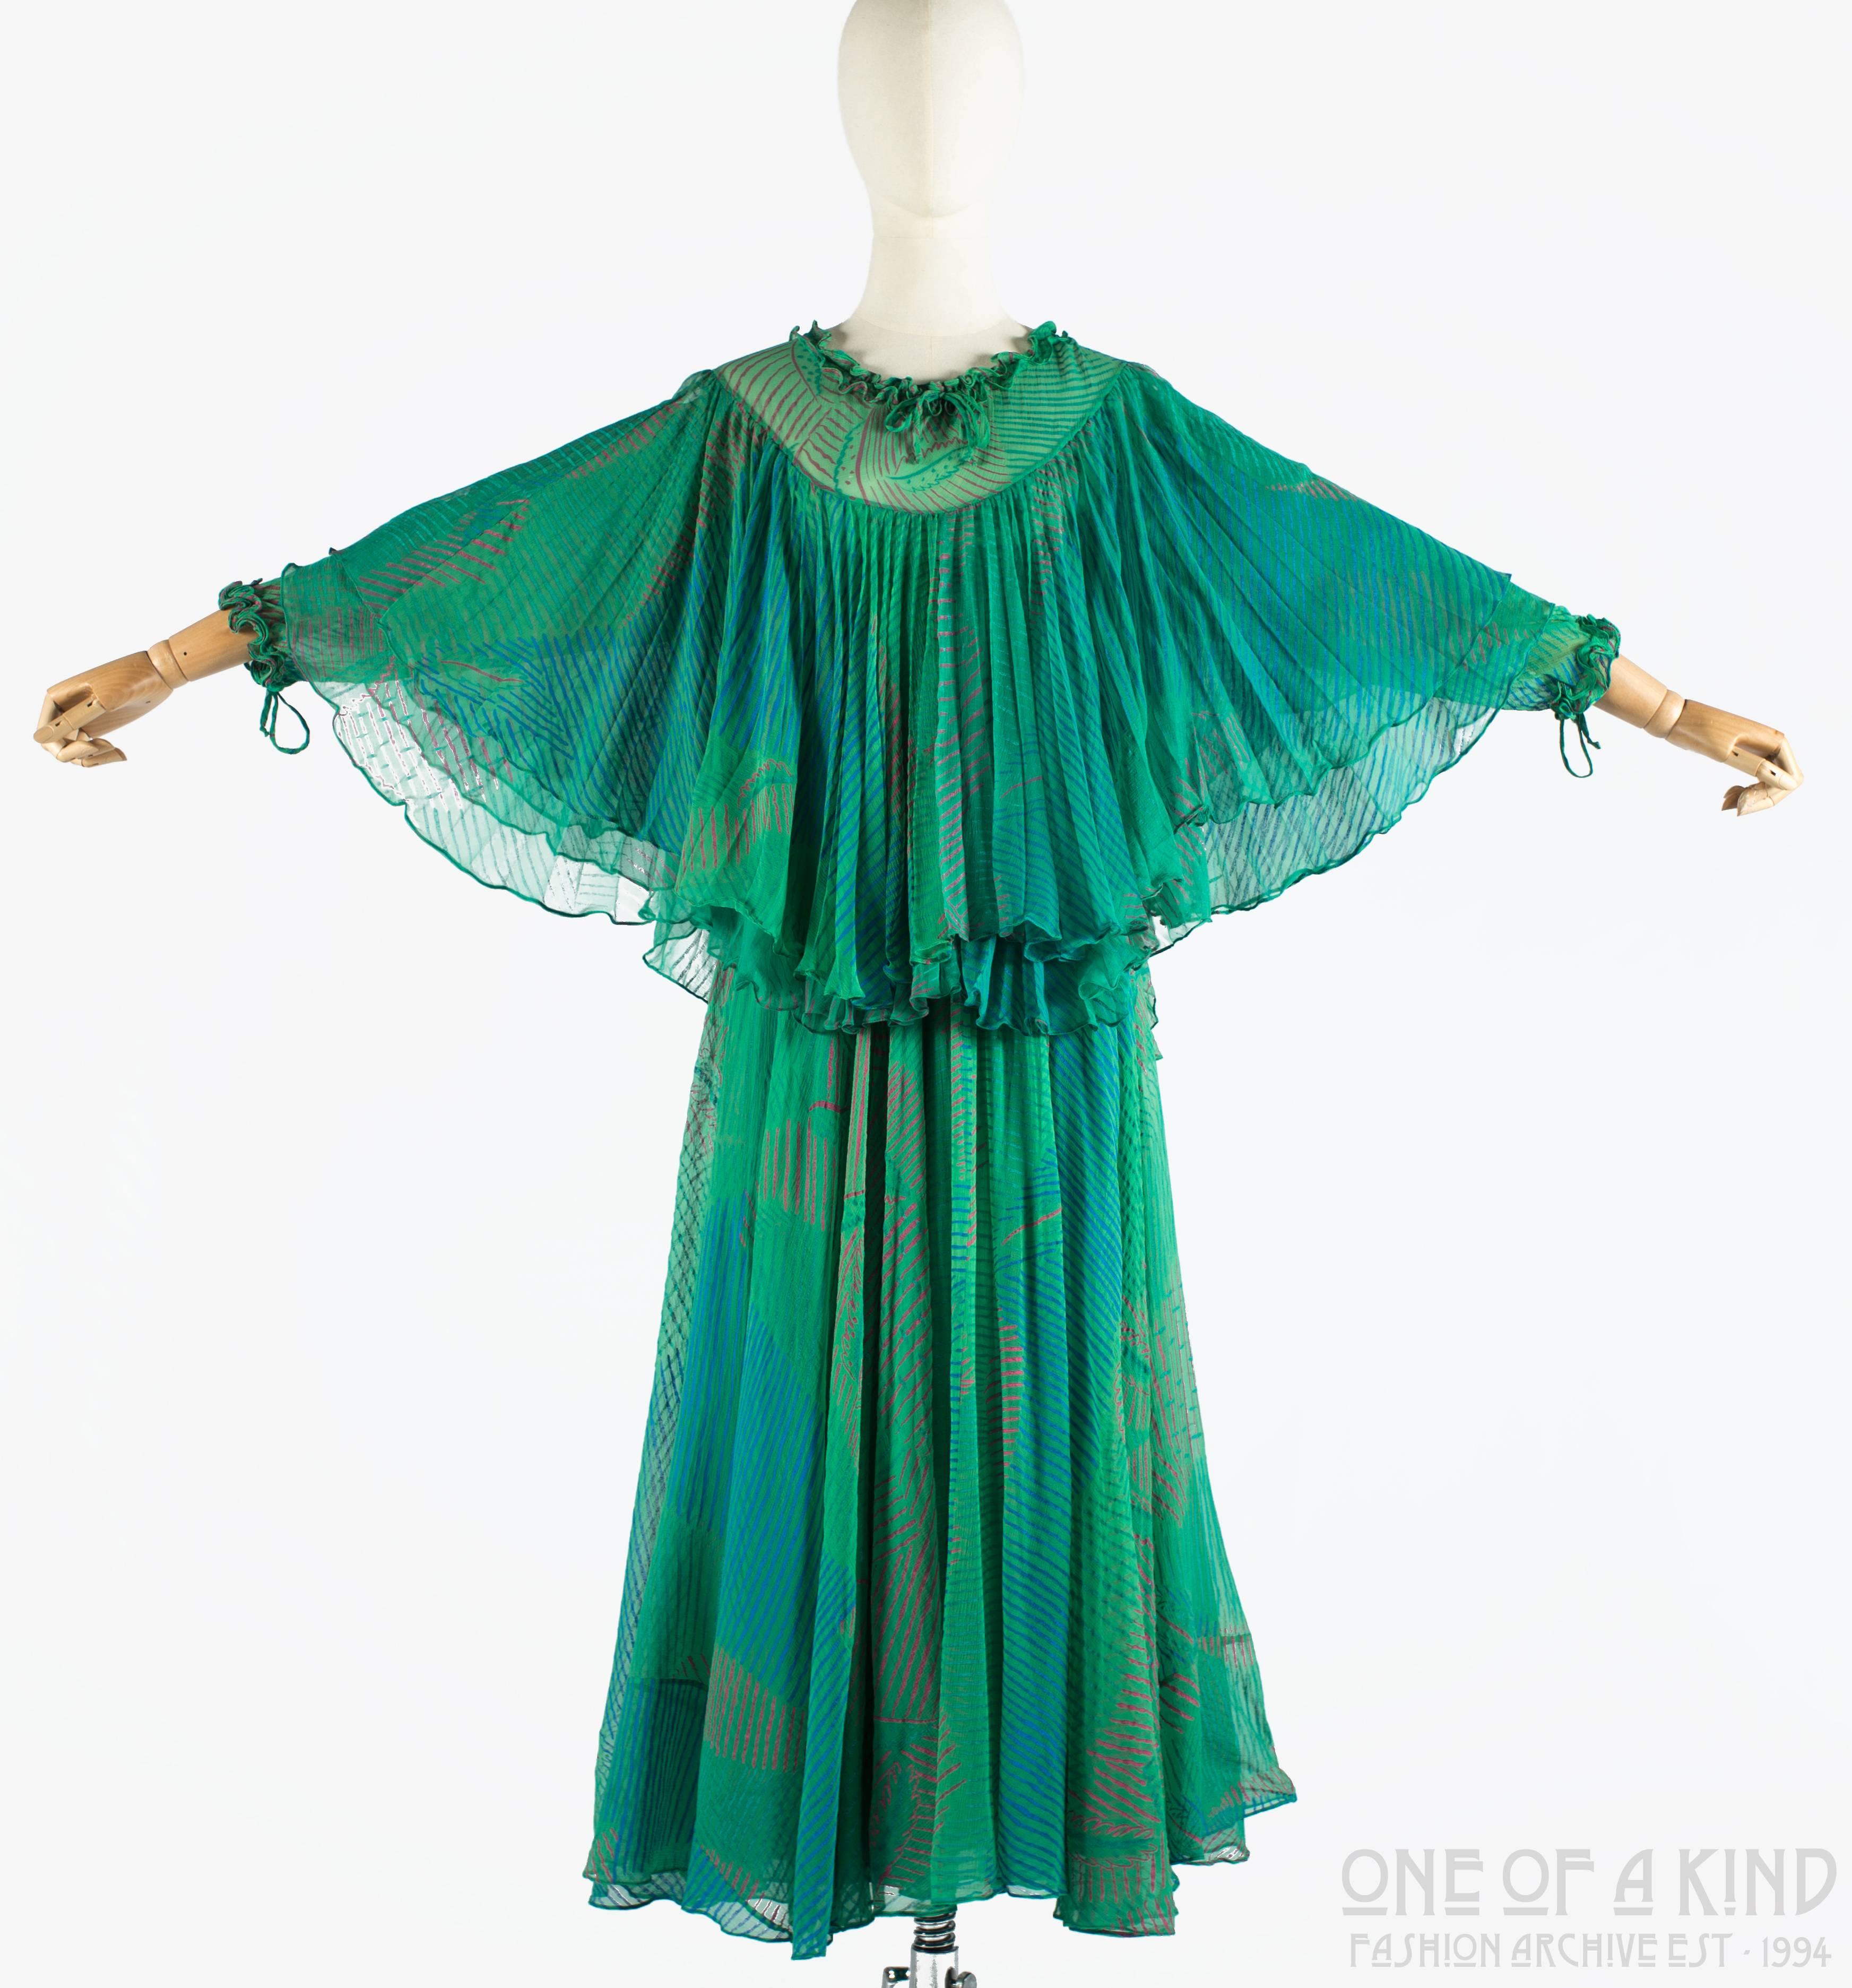 Ossie Clark green silk evening dress with print by Celia Birtwell 

- Drawstring fastenings at neck and cuffs with ruffled trim
- Semi-sheer yoke
- Two pleated panels around the bust 
- Full skirt with silk lining
-  during the mid to late 70s